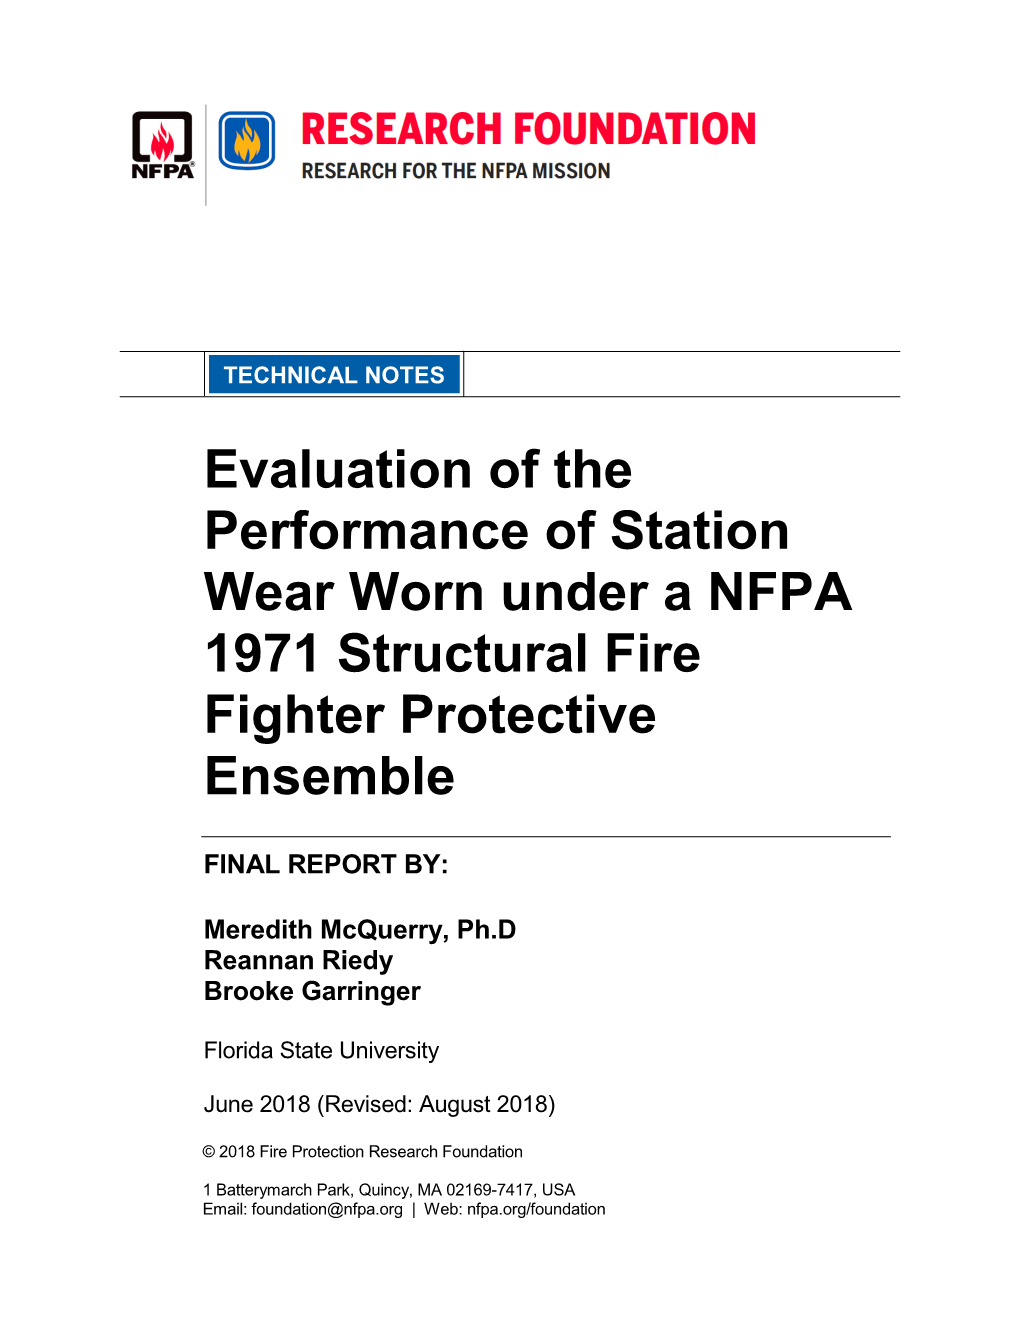 Evaluation of the Performance of Station Wear Worn Under a NFPA